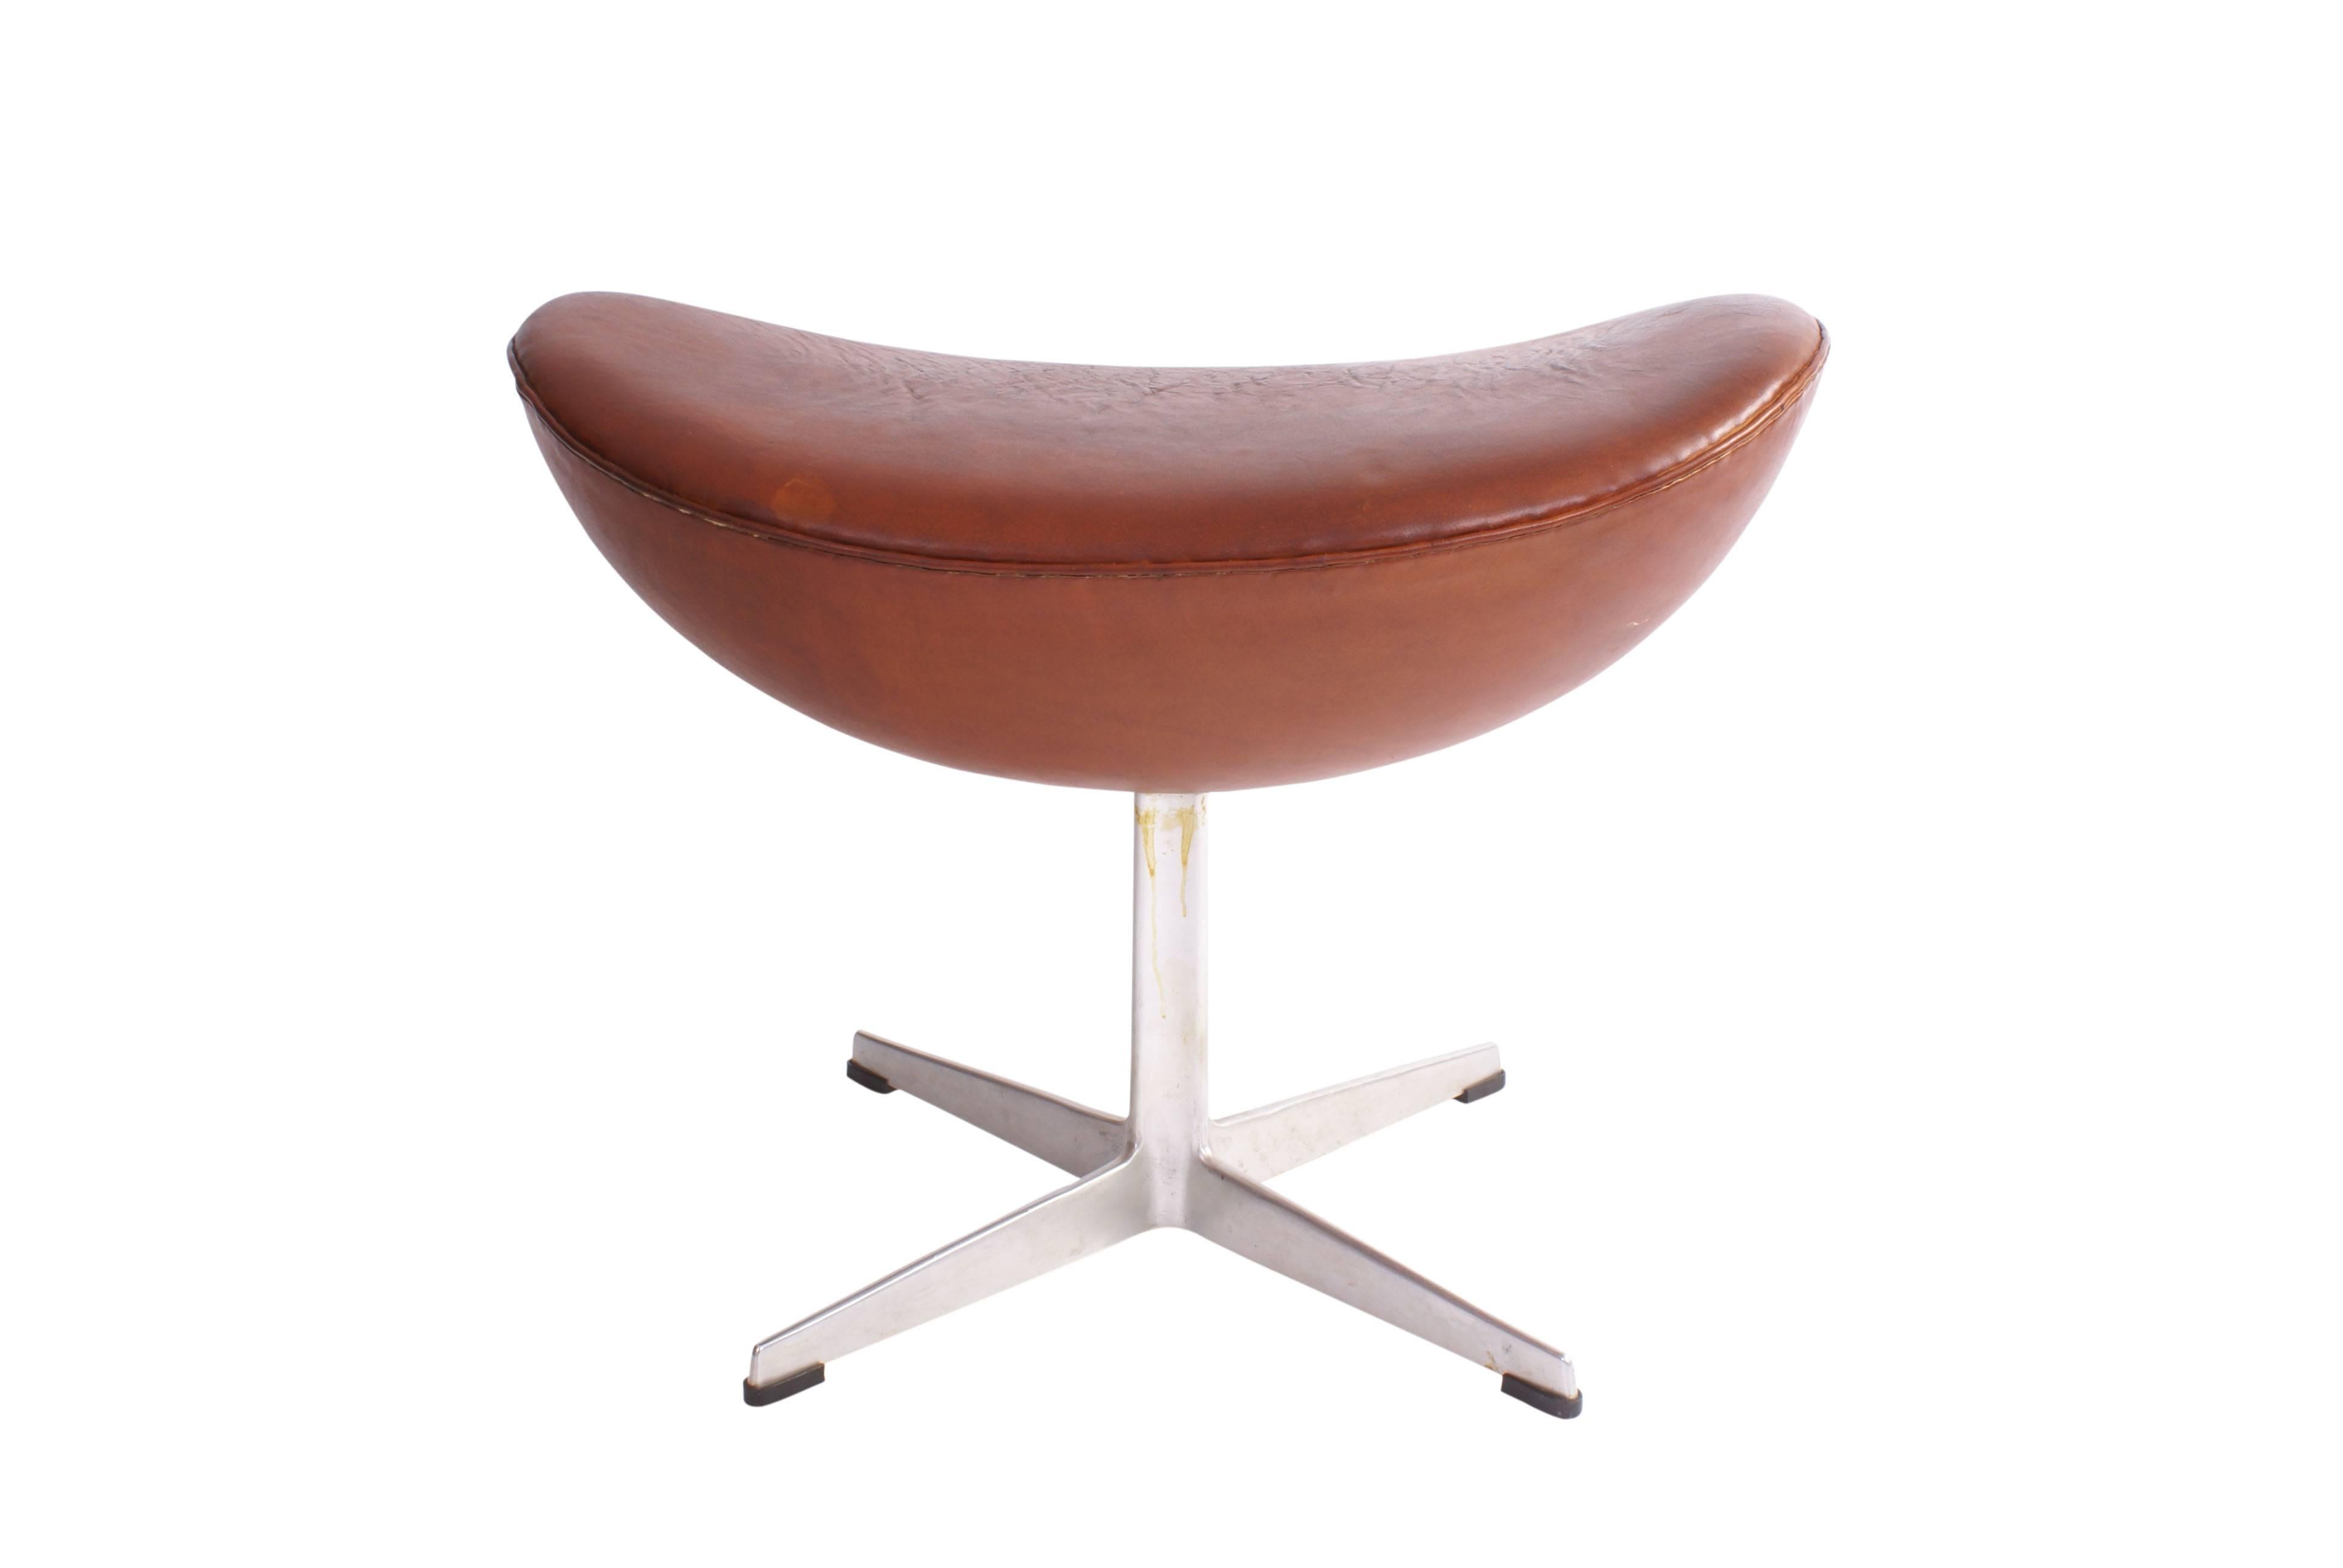 Arne Jacobsen 1960s Egg Chair and Stool in Patinated Leather for Fritz Hansen 1